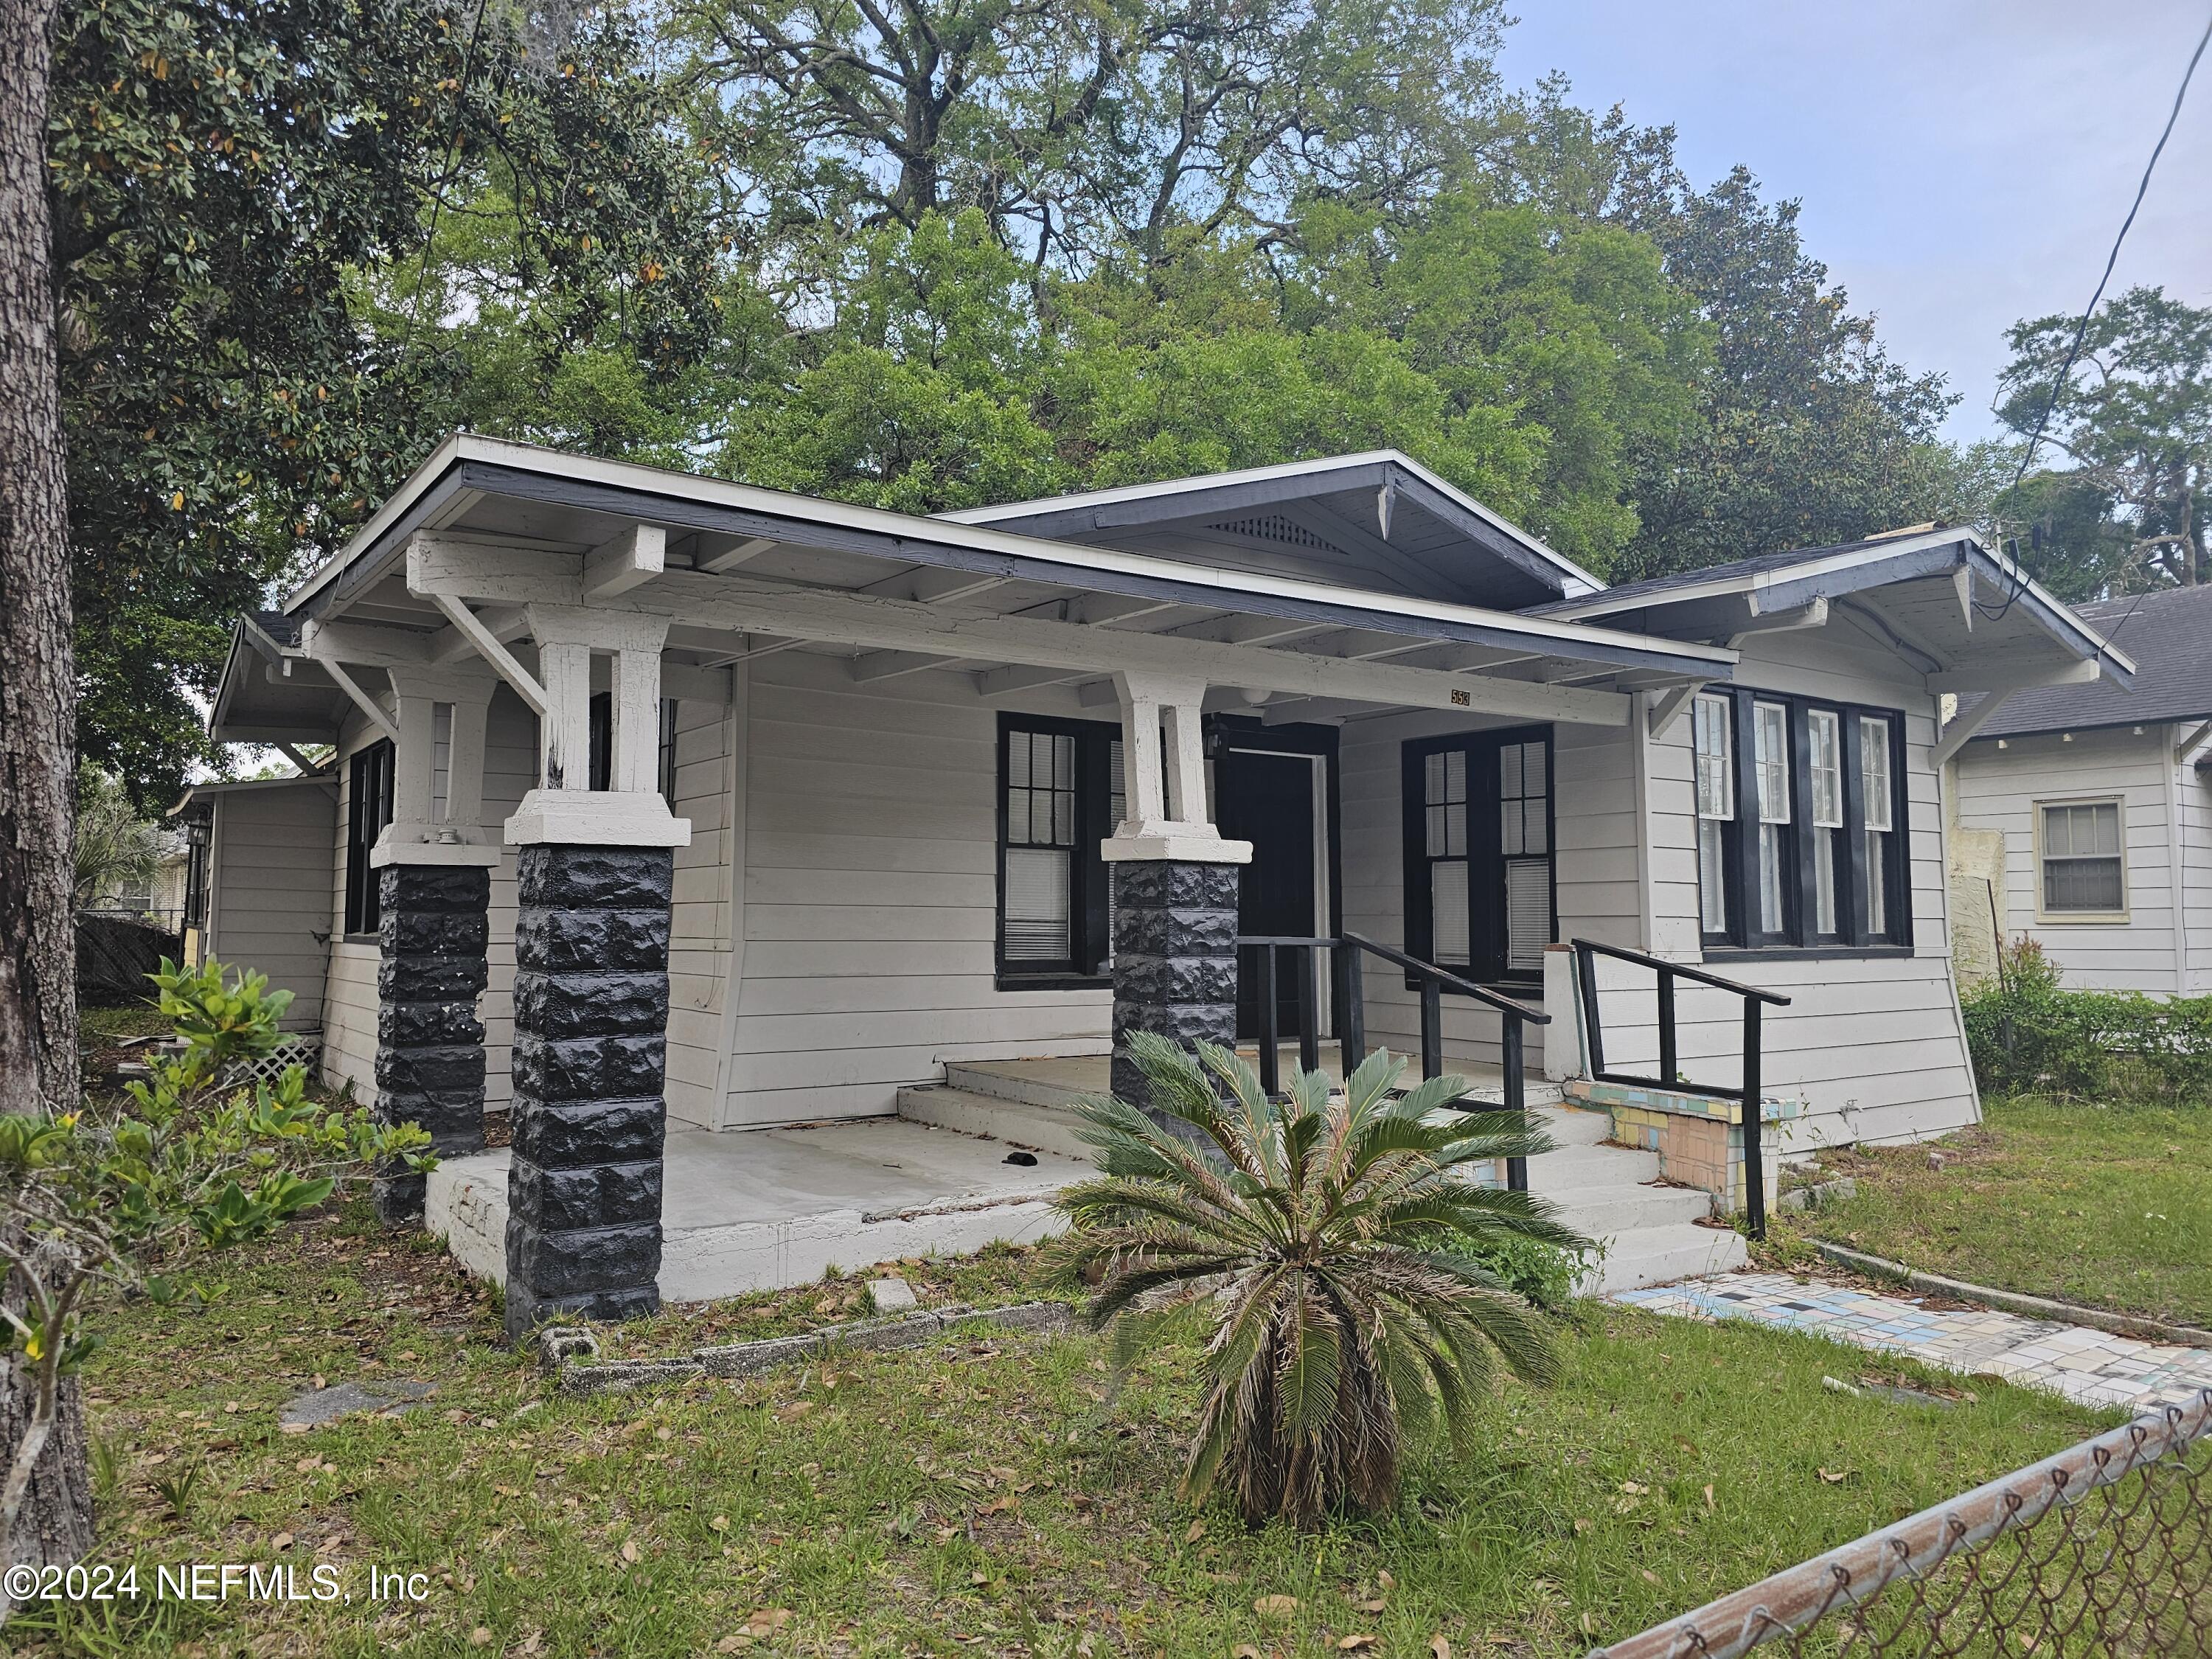 Jacksonville, FL home for sale located at 553 W 18th Street, Jacksonville, FL 32206